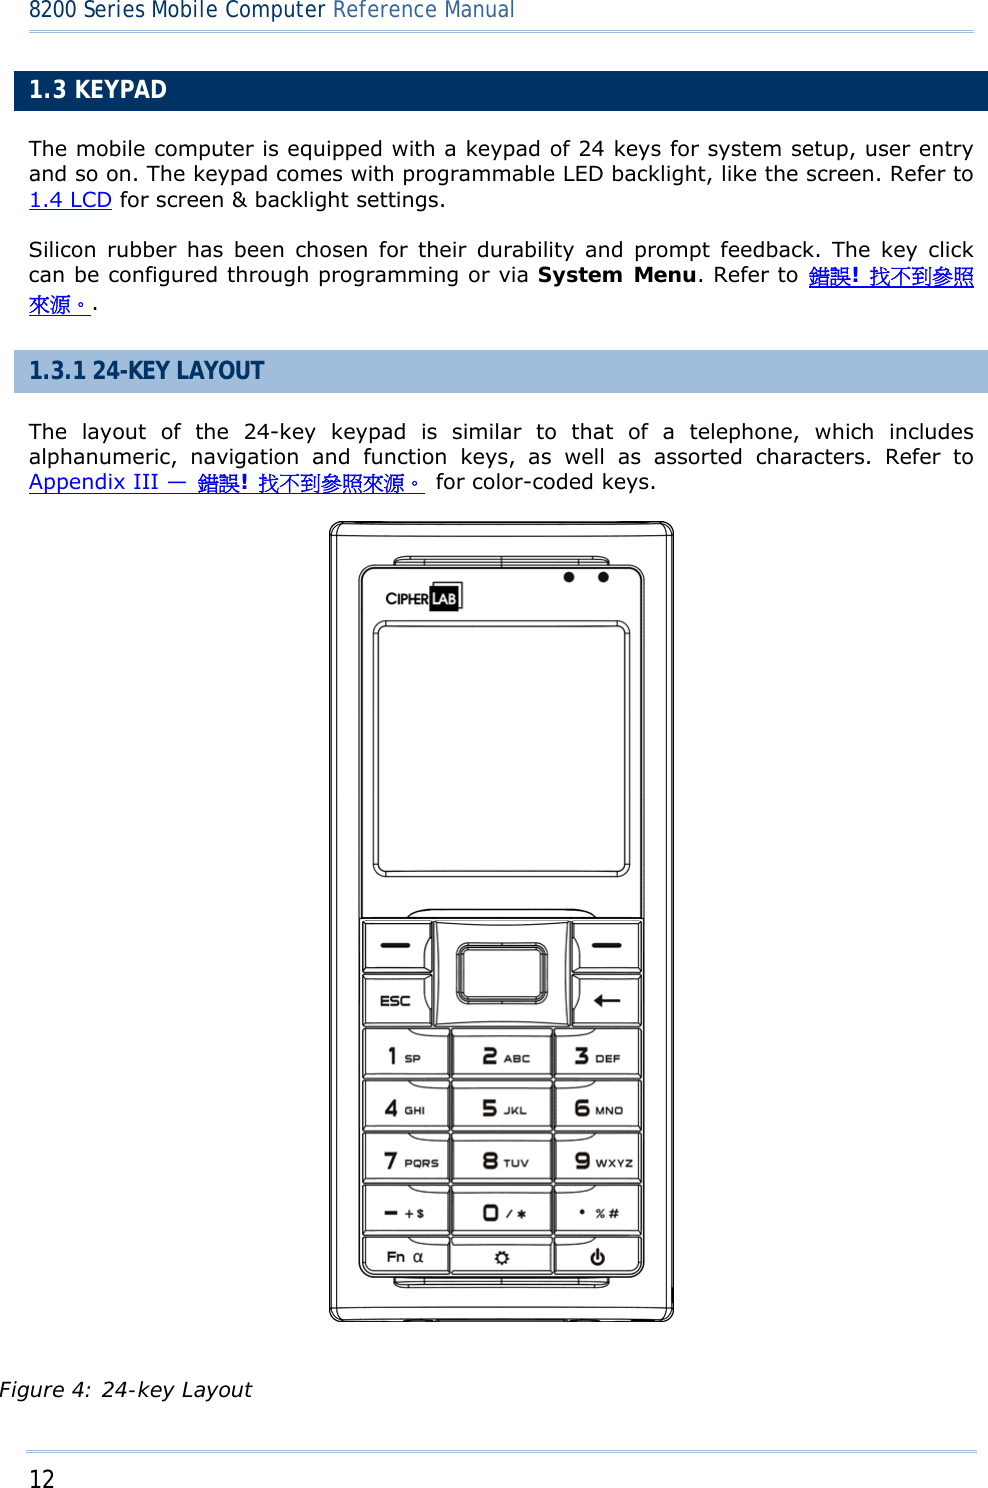 12  8200 Series Mobile Computer Reference Manual  1.3 KEYPAD The mobile computer is equipped with a keypad of 24 keys for system setup, user entry and so on. The keypad comes with programmable LED backlight, like the screen. Refer to 1.4 LCD for screen &amp; backlight settings. Silicon rubber has been chosen for their durability and prompt feedback. The key click can be configured through programming or via System Menu. Refer to 錯誤! 找不到參照來源。. 1.3.1 24-KEY LAYOUT The layout of the 24-key keypad is similar to that of a telephone, which includes alphanumeric, navigation and function keys, as well as assorted characters. Refer to Appendix III —  錯誤! 找不到參照來源。  for color-coded keys.  Figure 4: 24-key Layout 